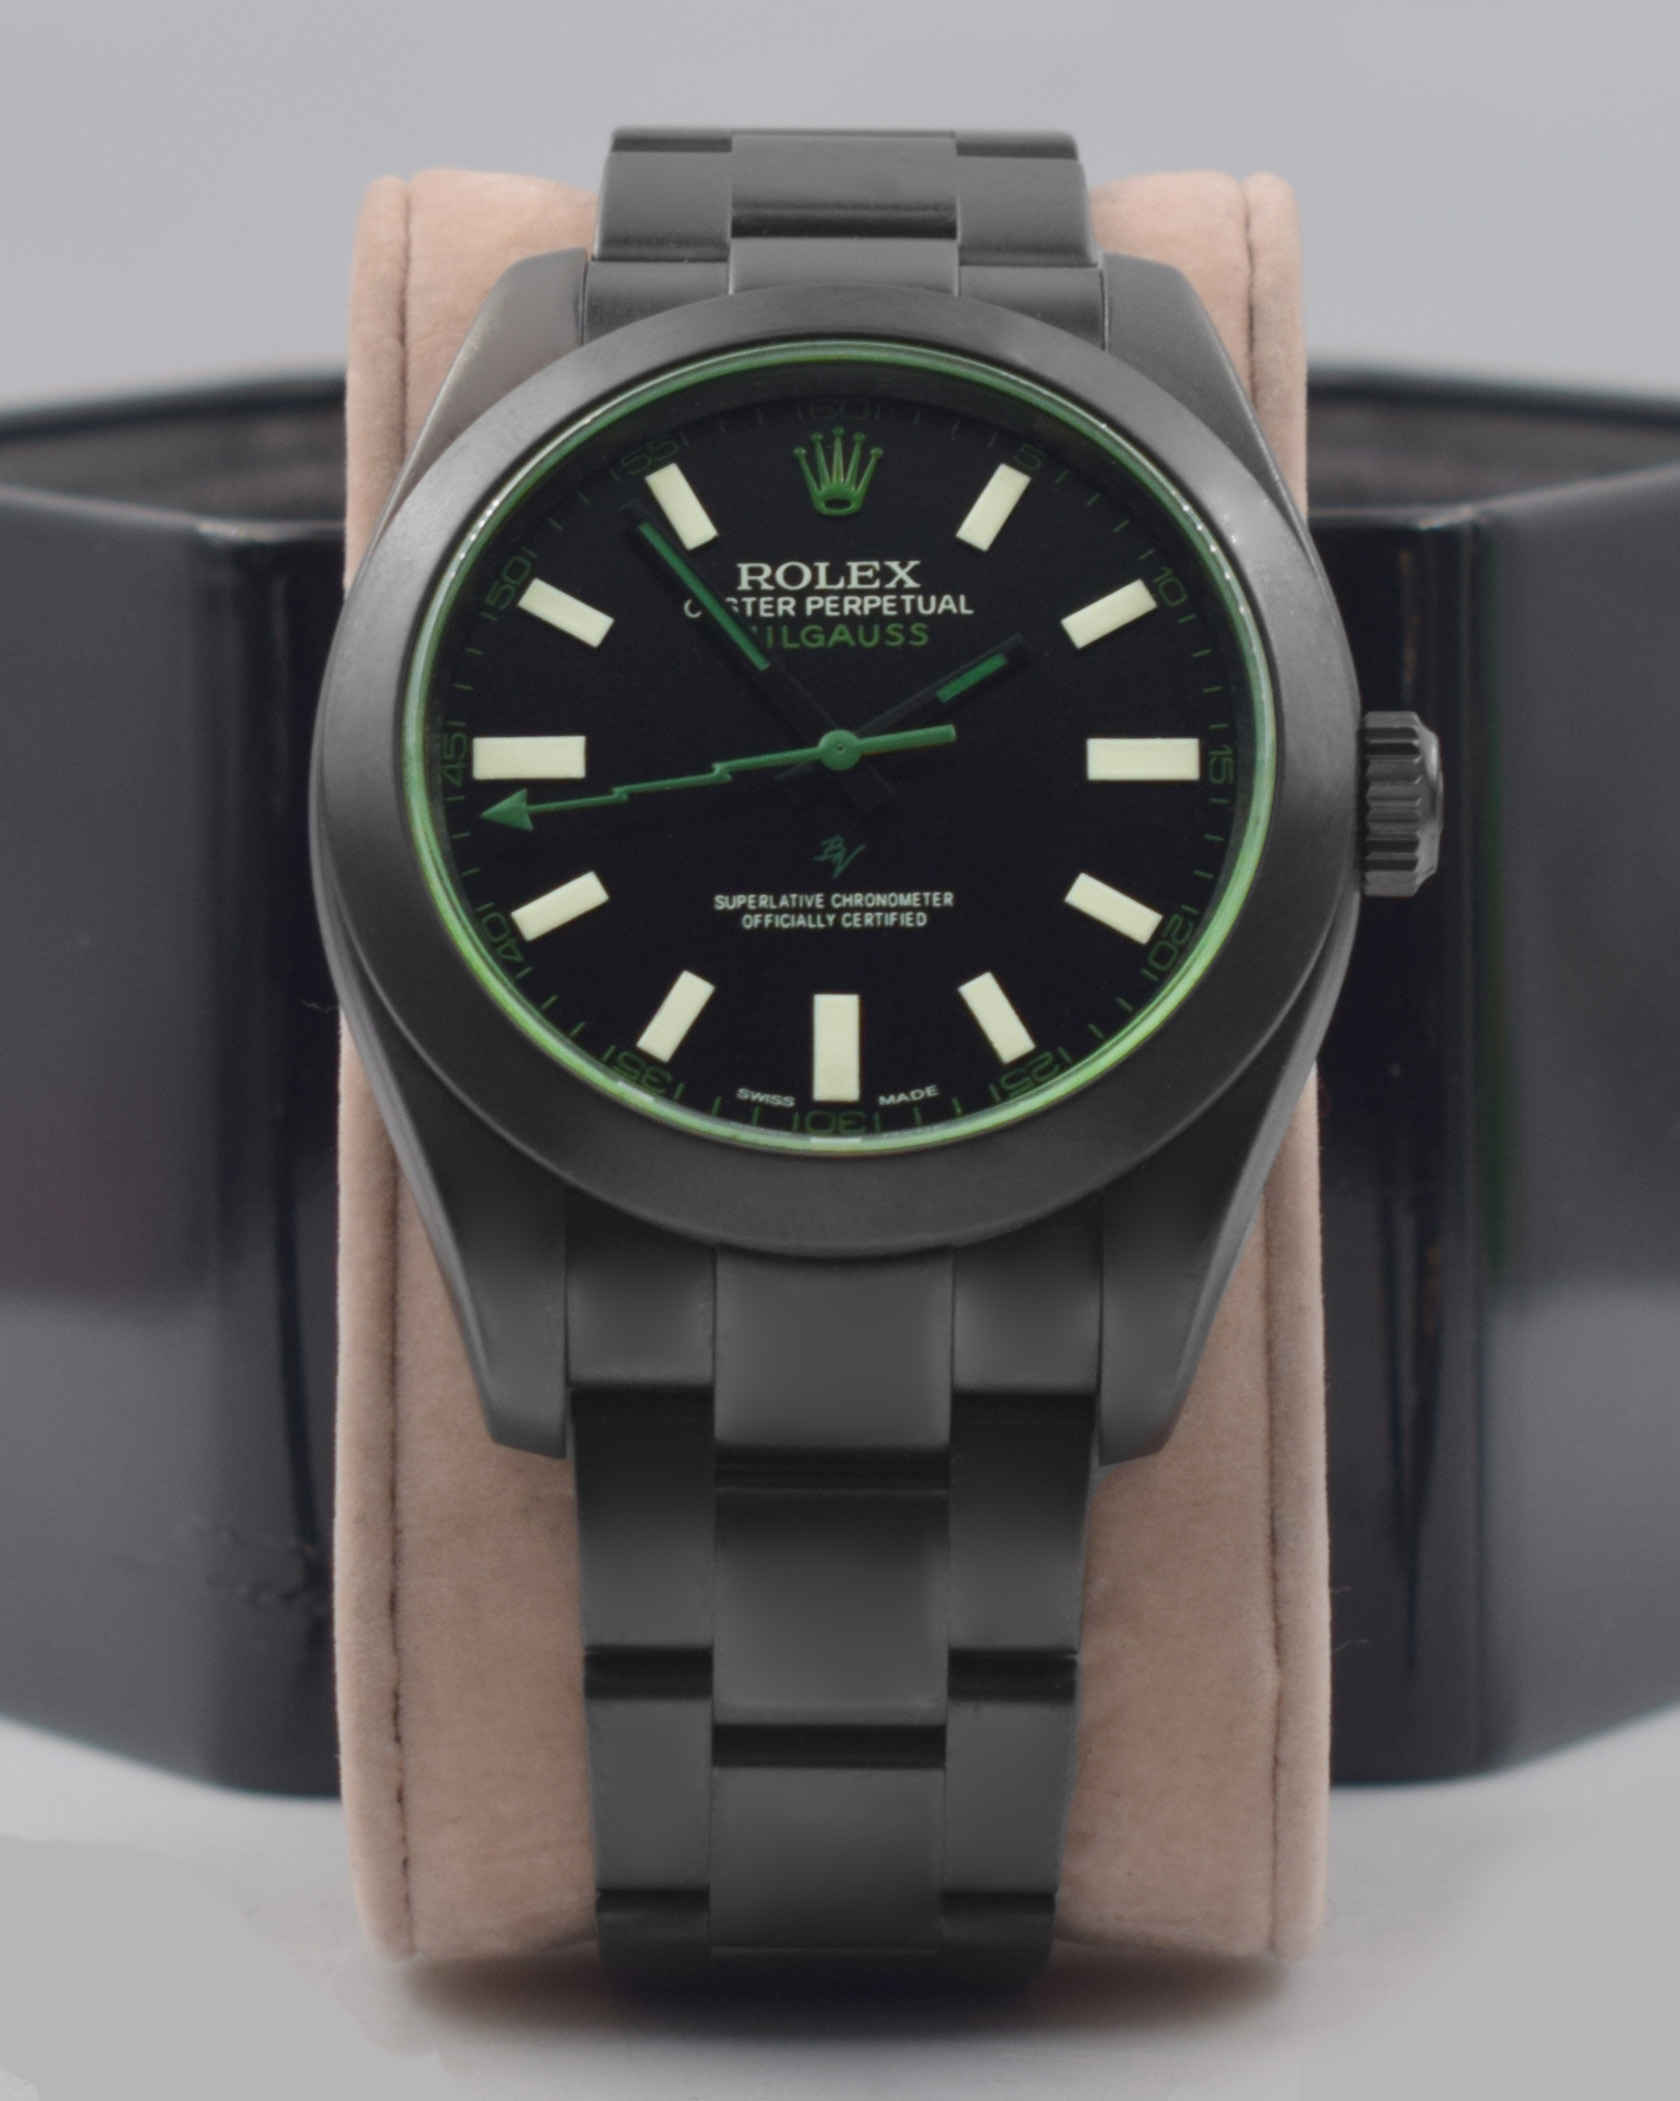 Bamford Milgauss Watches, ref 116400GV, 'Limited Edition' One of 100